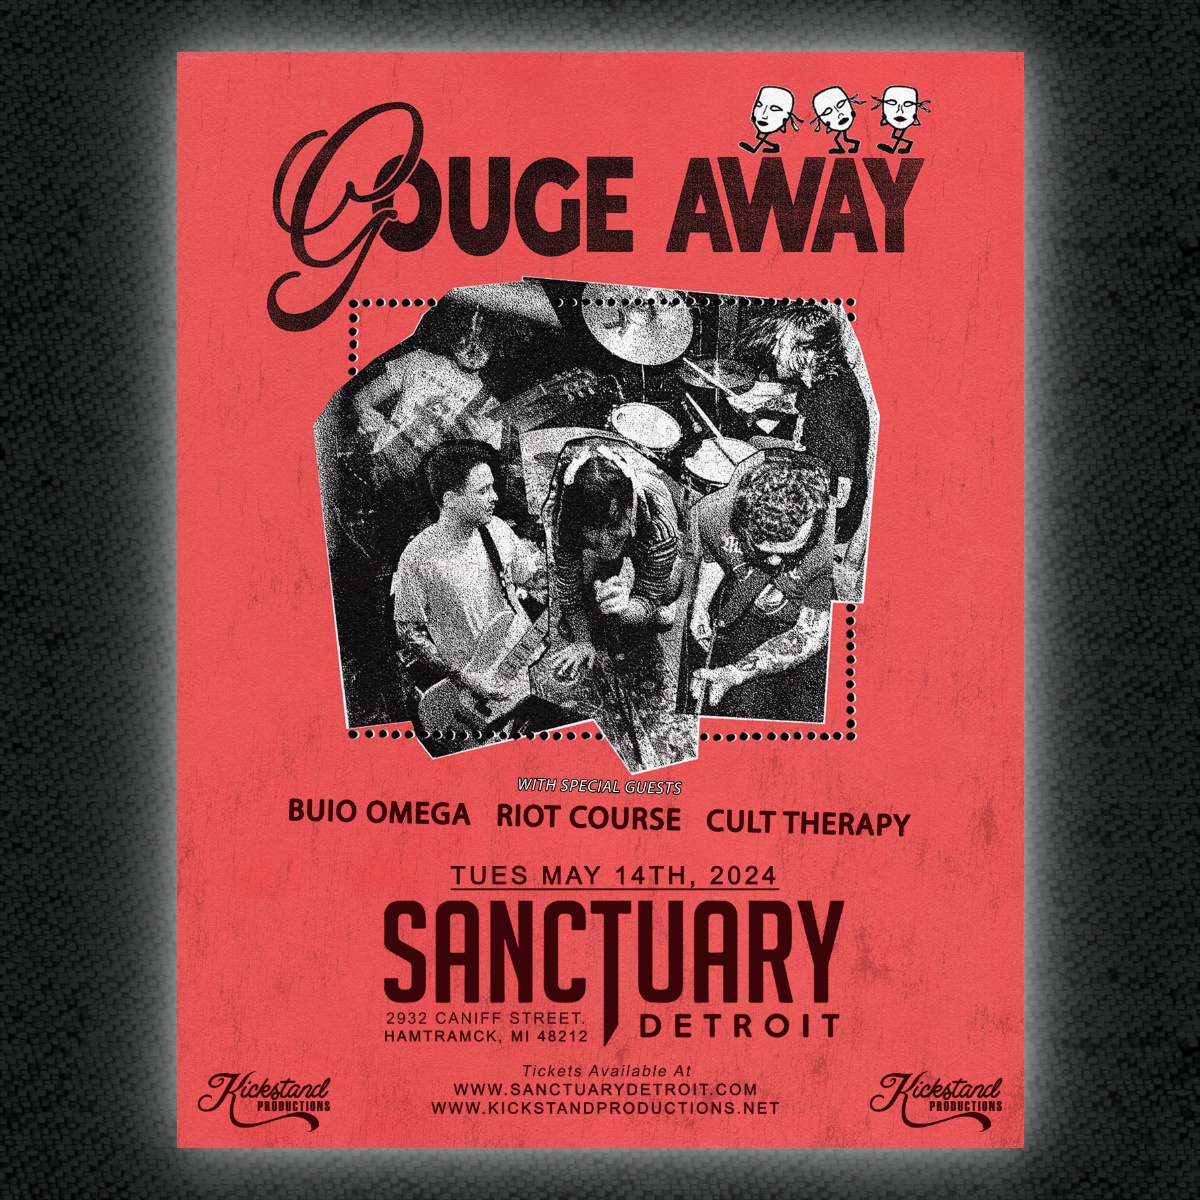 TONIGHT! Gouge Away hits The Sanctuary with special guests Buio Omega, Riot Course and Cult Therapy !! Doors at 7pm - grab your tickets at sanctuarydetroit.com